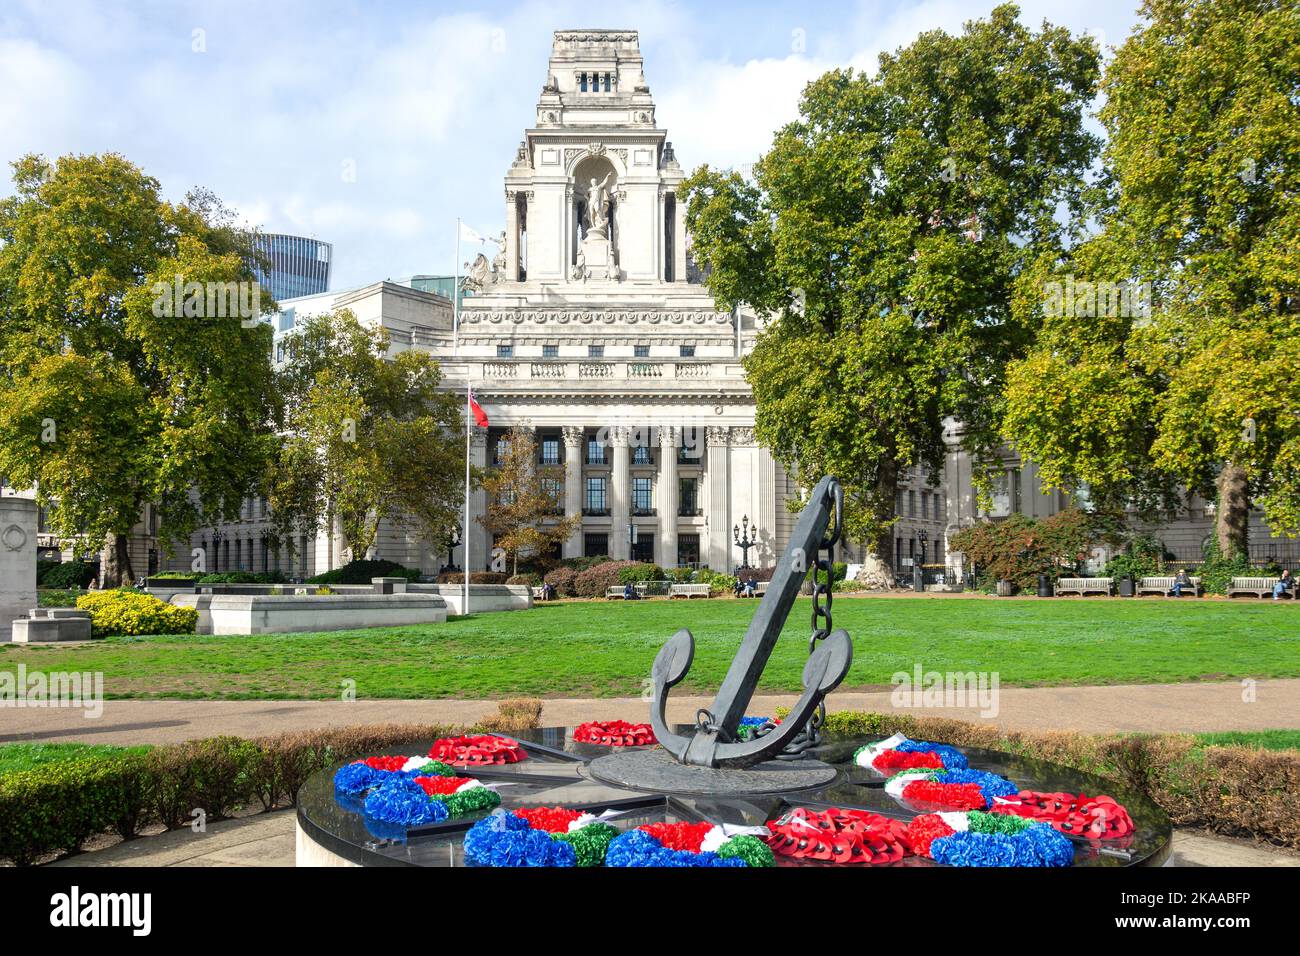 Four Seasons Hotel & Royal Navy Memorial, Trinity Square Gardens, Tower Hill, London Borough of Tower Hamlets, Greater London, Angleterre, Royaume-Uni Banque D'Images